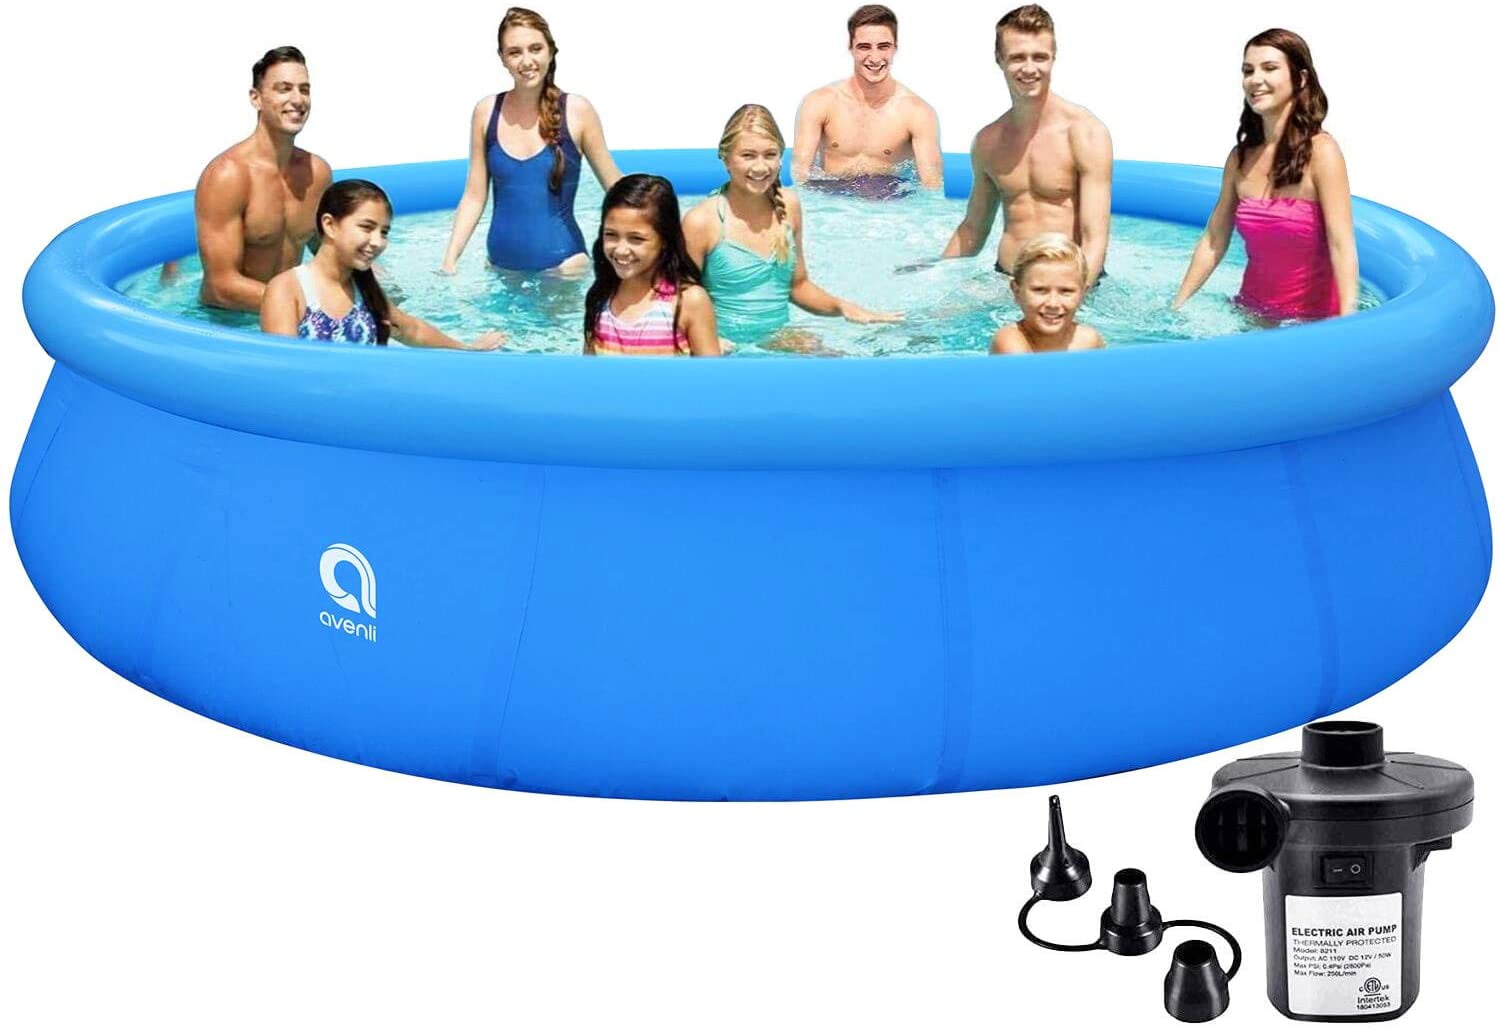 Portable Swimming Pool 10 feet 10'x30 Above Ground for Kids Family Water Sport Backyard Garden Inflatable 10' x 30 